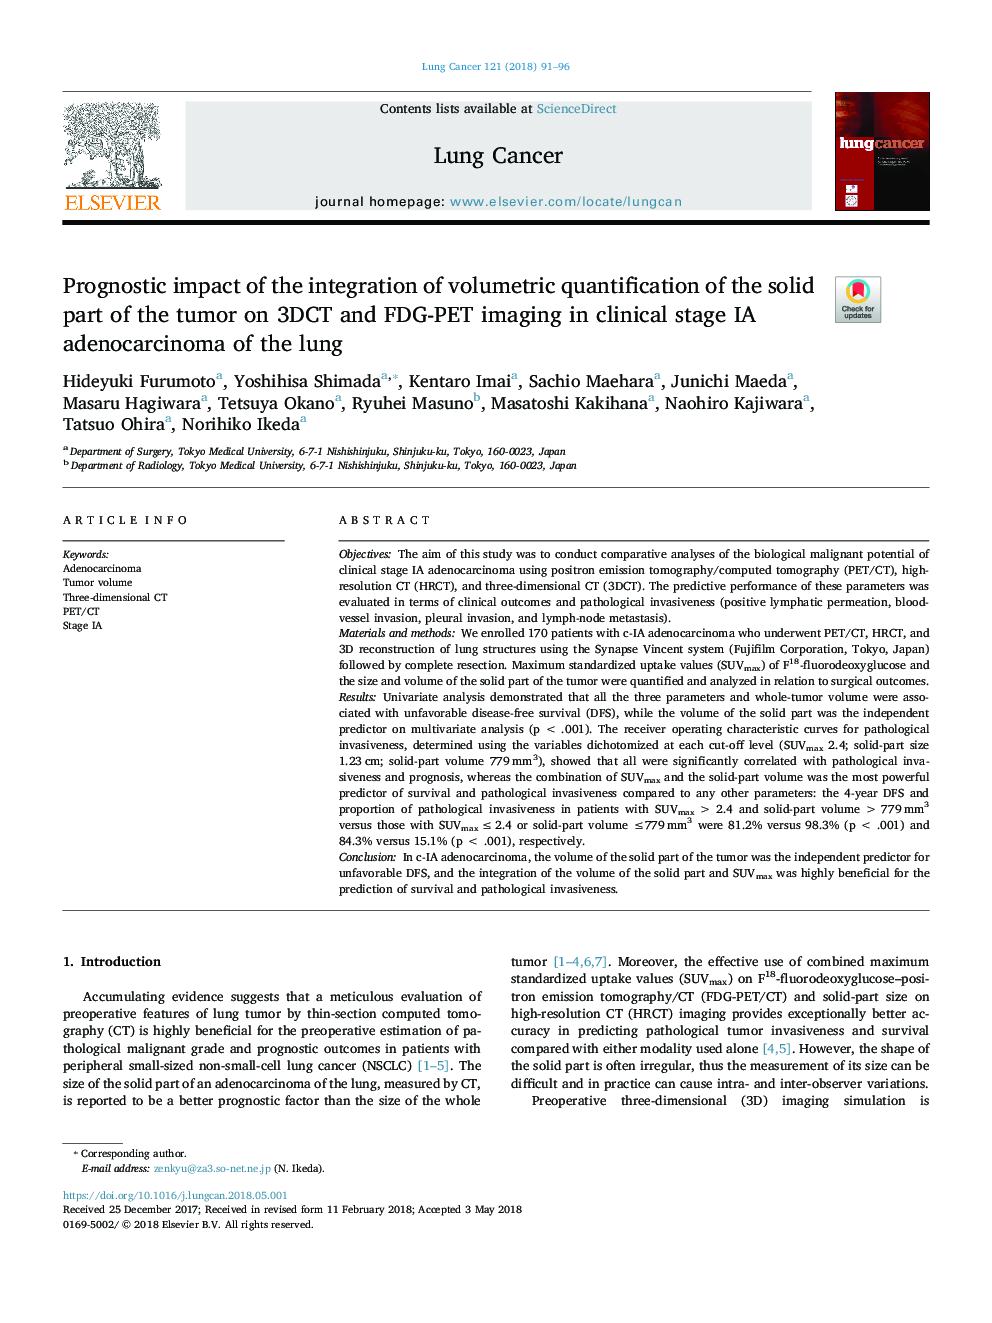 Prognostic impact of the integration of volumetric quantification of the solid part of the tumor on 3DCT and FDG-PET imaging in clinical stage IA adenocarcinoma of the lung